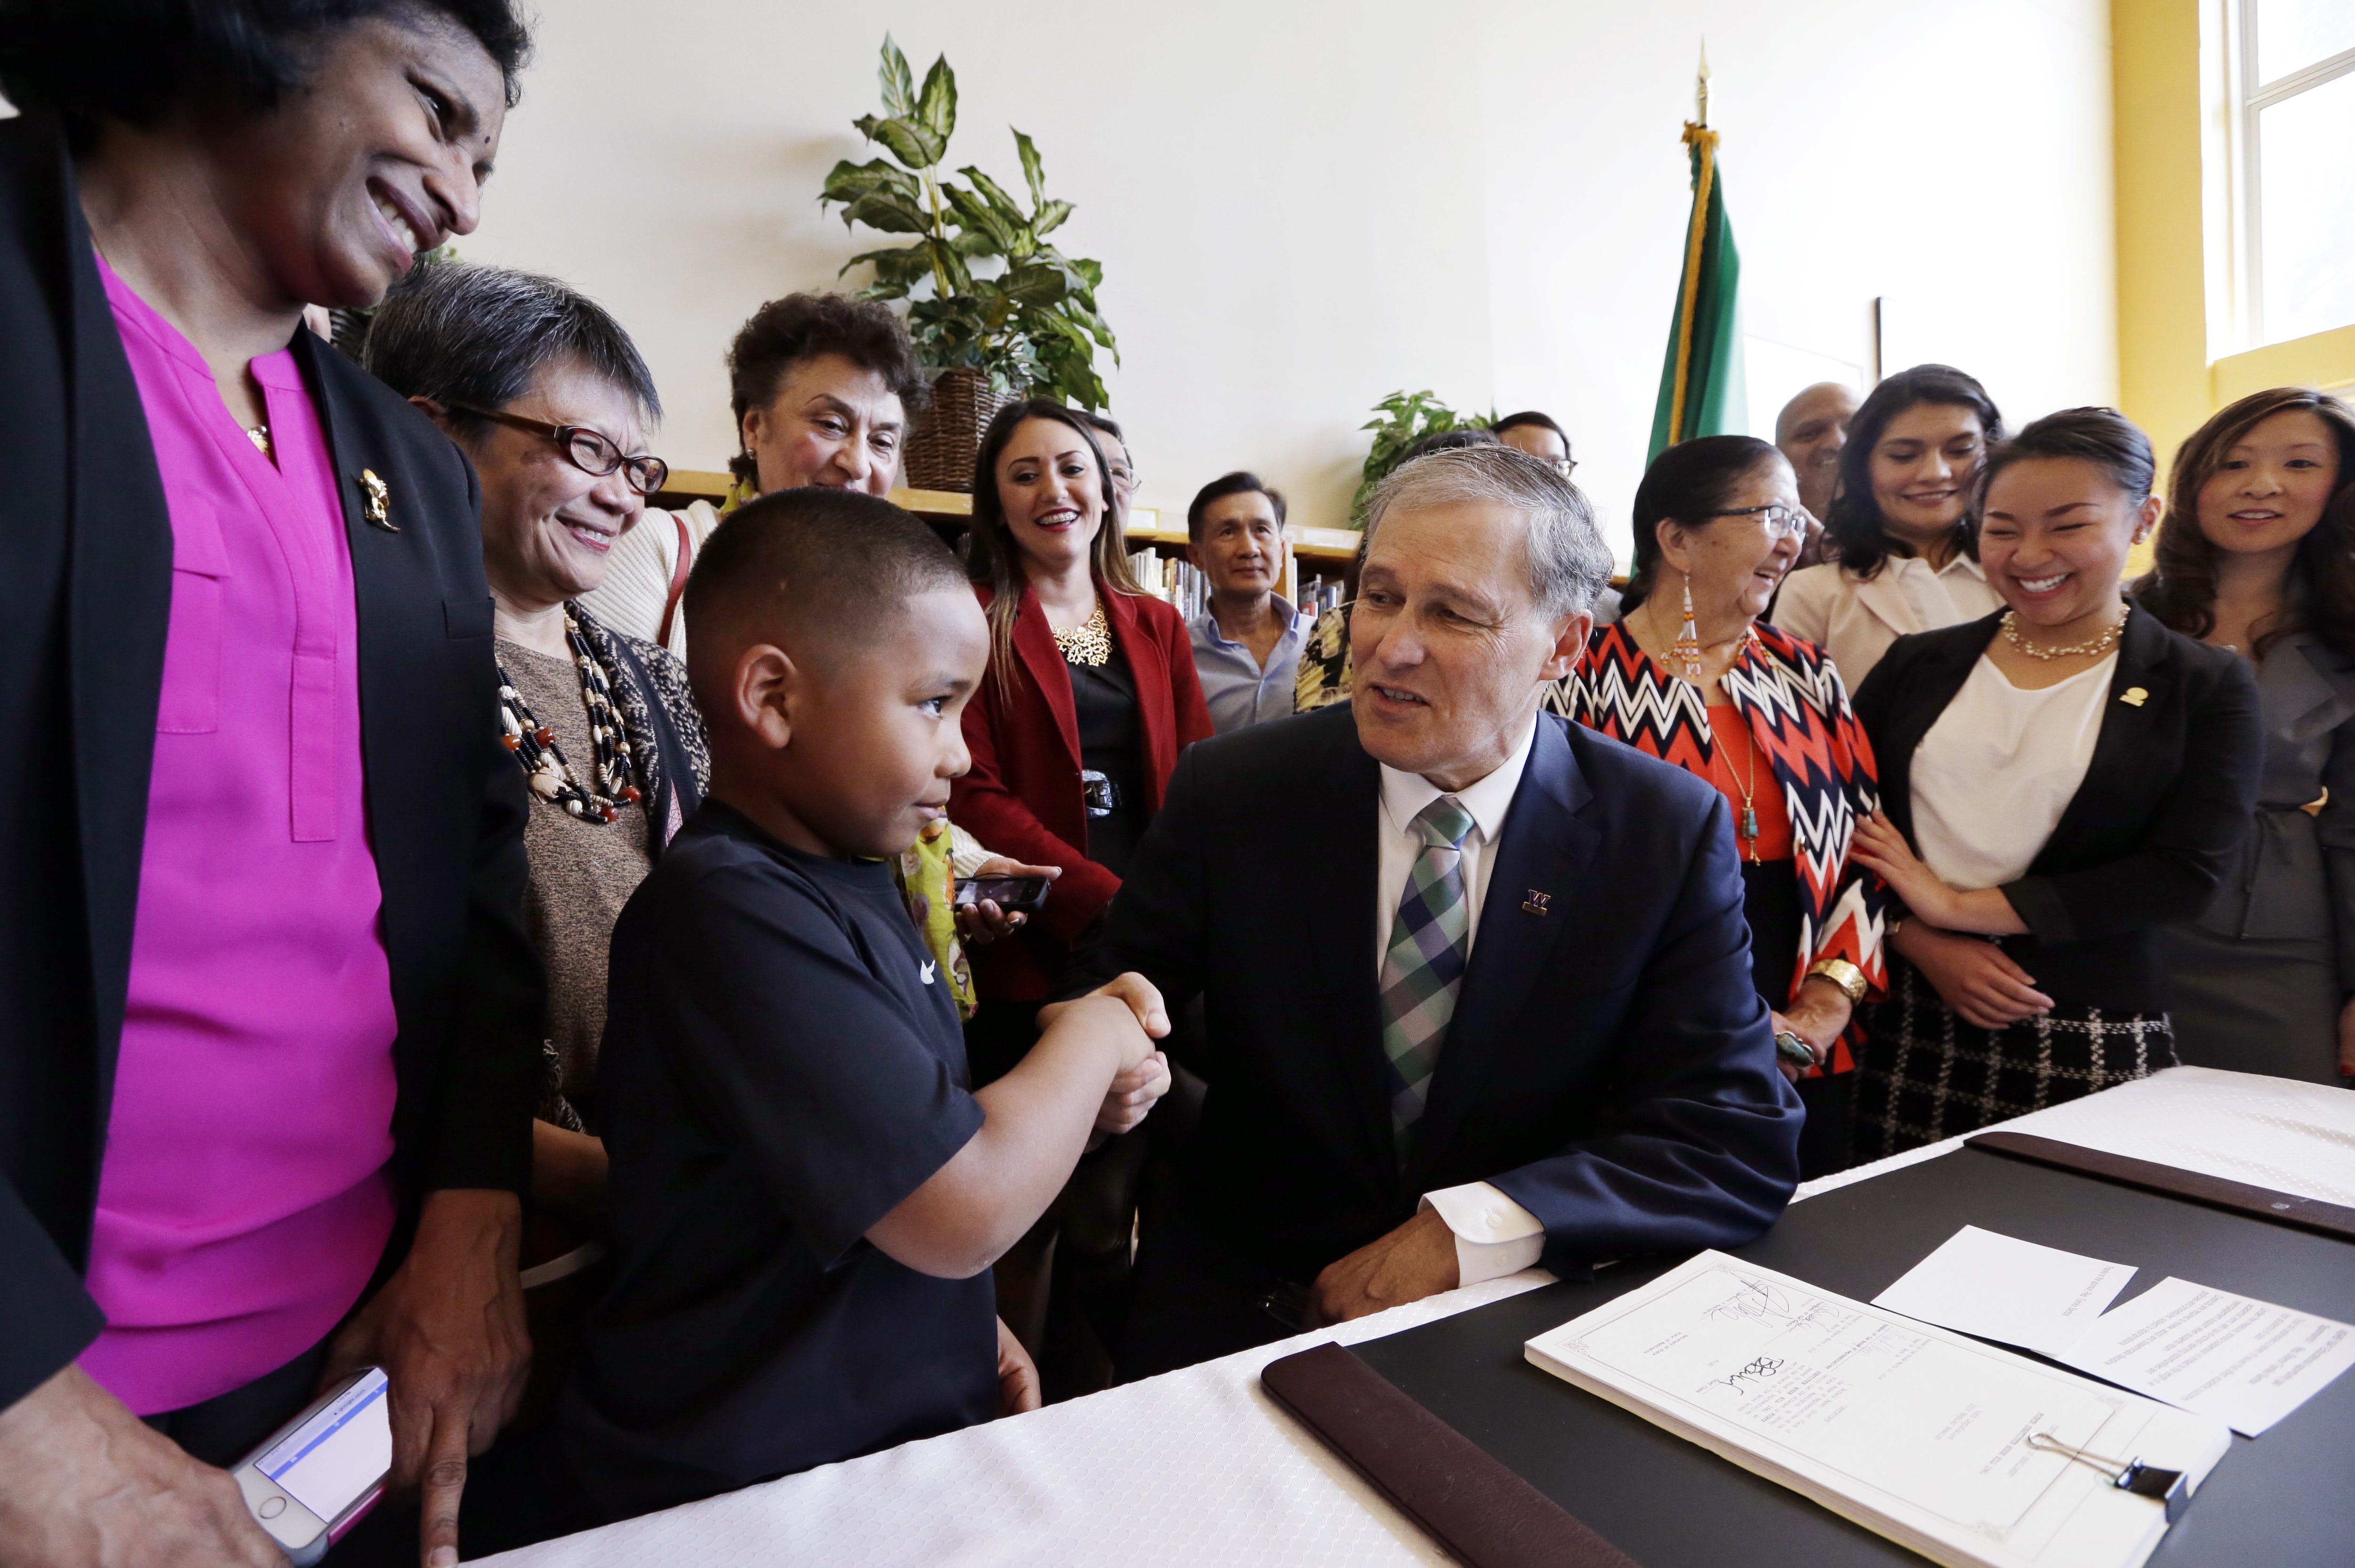 Gov. Jay Inslee shakes hands with a boy as officials stand behind after signing House Bill 1541 at Aki Kurose Middle School on Wednesday in Seattle. Inslee signed the bill aimed at closing the so-called opportunity gaps faced by kids from low-income and minority families.